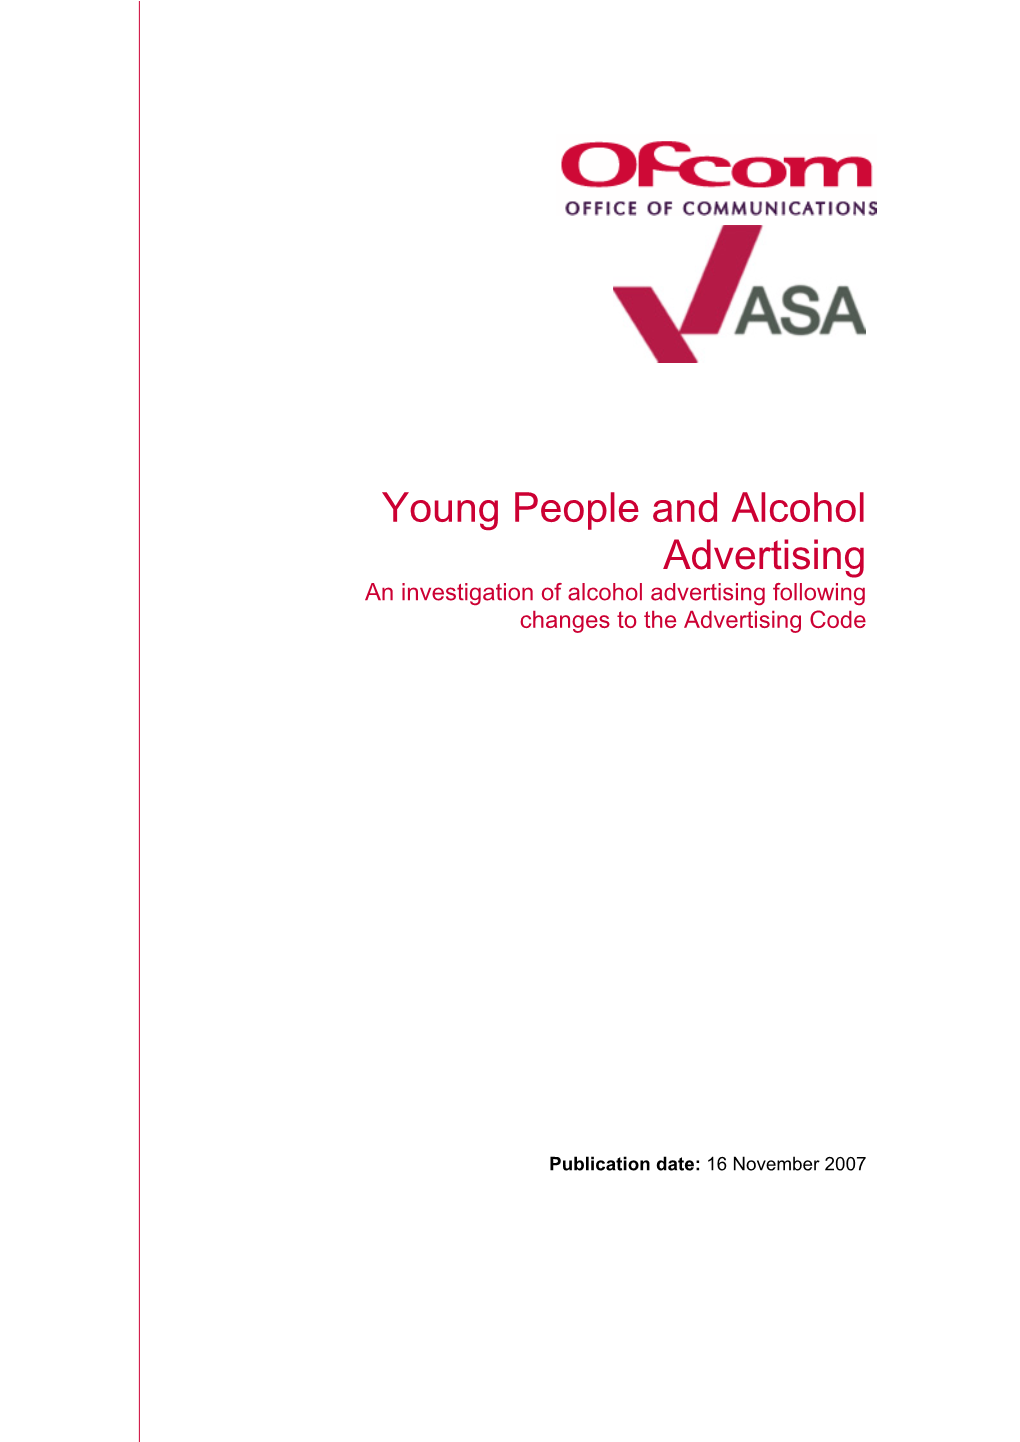 Young People and Alcohol Advertising an Investigation of Alcohol Advertising Following Changes to the Advertising Code